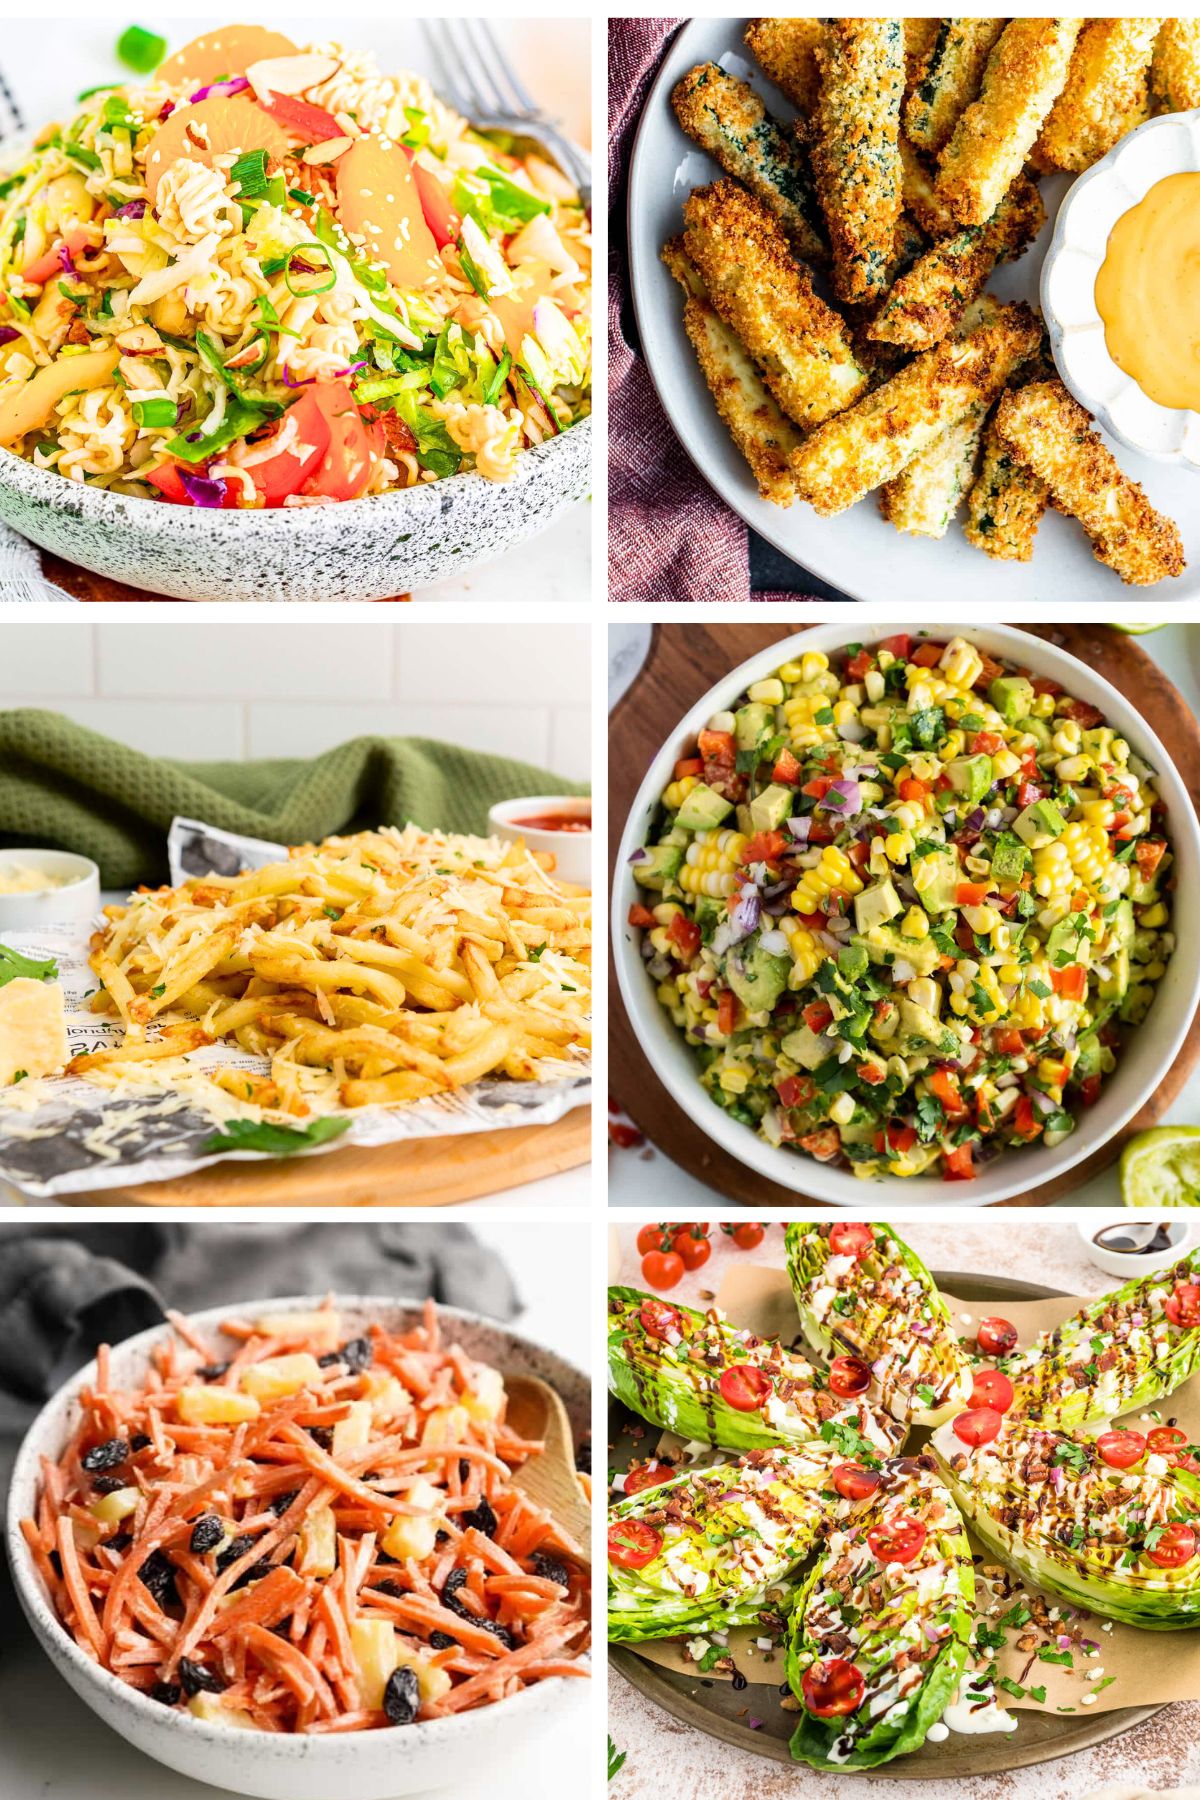 What to serve with ham and cheese sliders; asian pasta salad, zucchini fries, parmesan fries, corn salad, carrot and raisin salad and Romaine wedge salad.